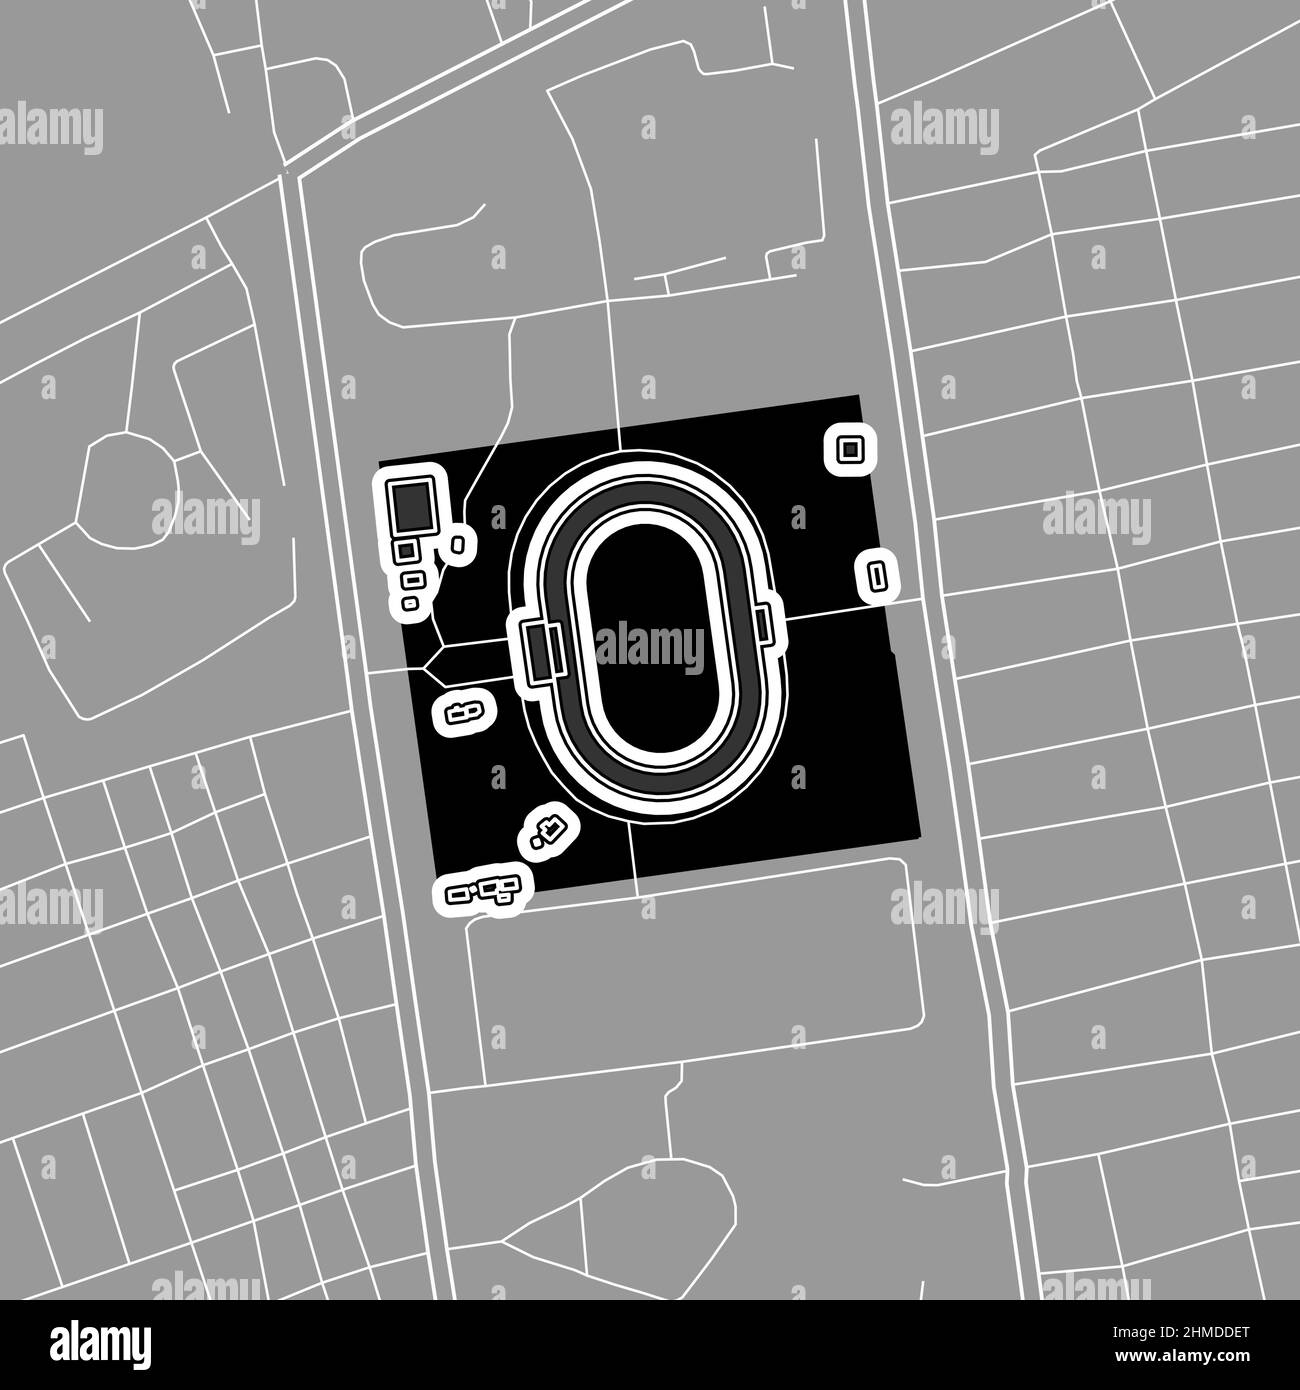 Mogadishu, Baseball MLB Stadium, outline vector map. The baseball statium map was drawn with white areas and lines for main roads, side roads. Stock Vector